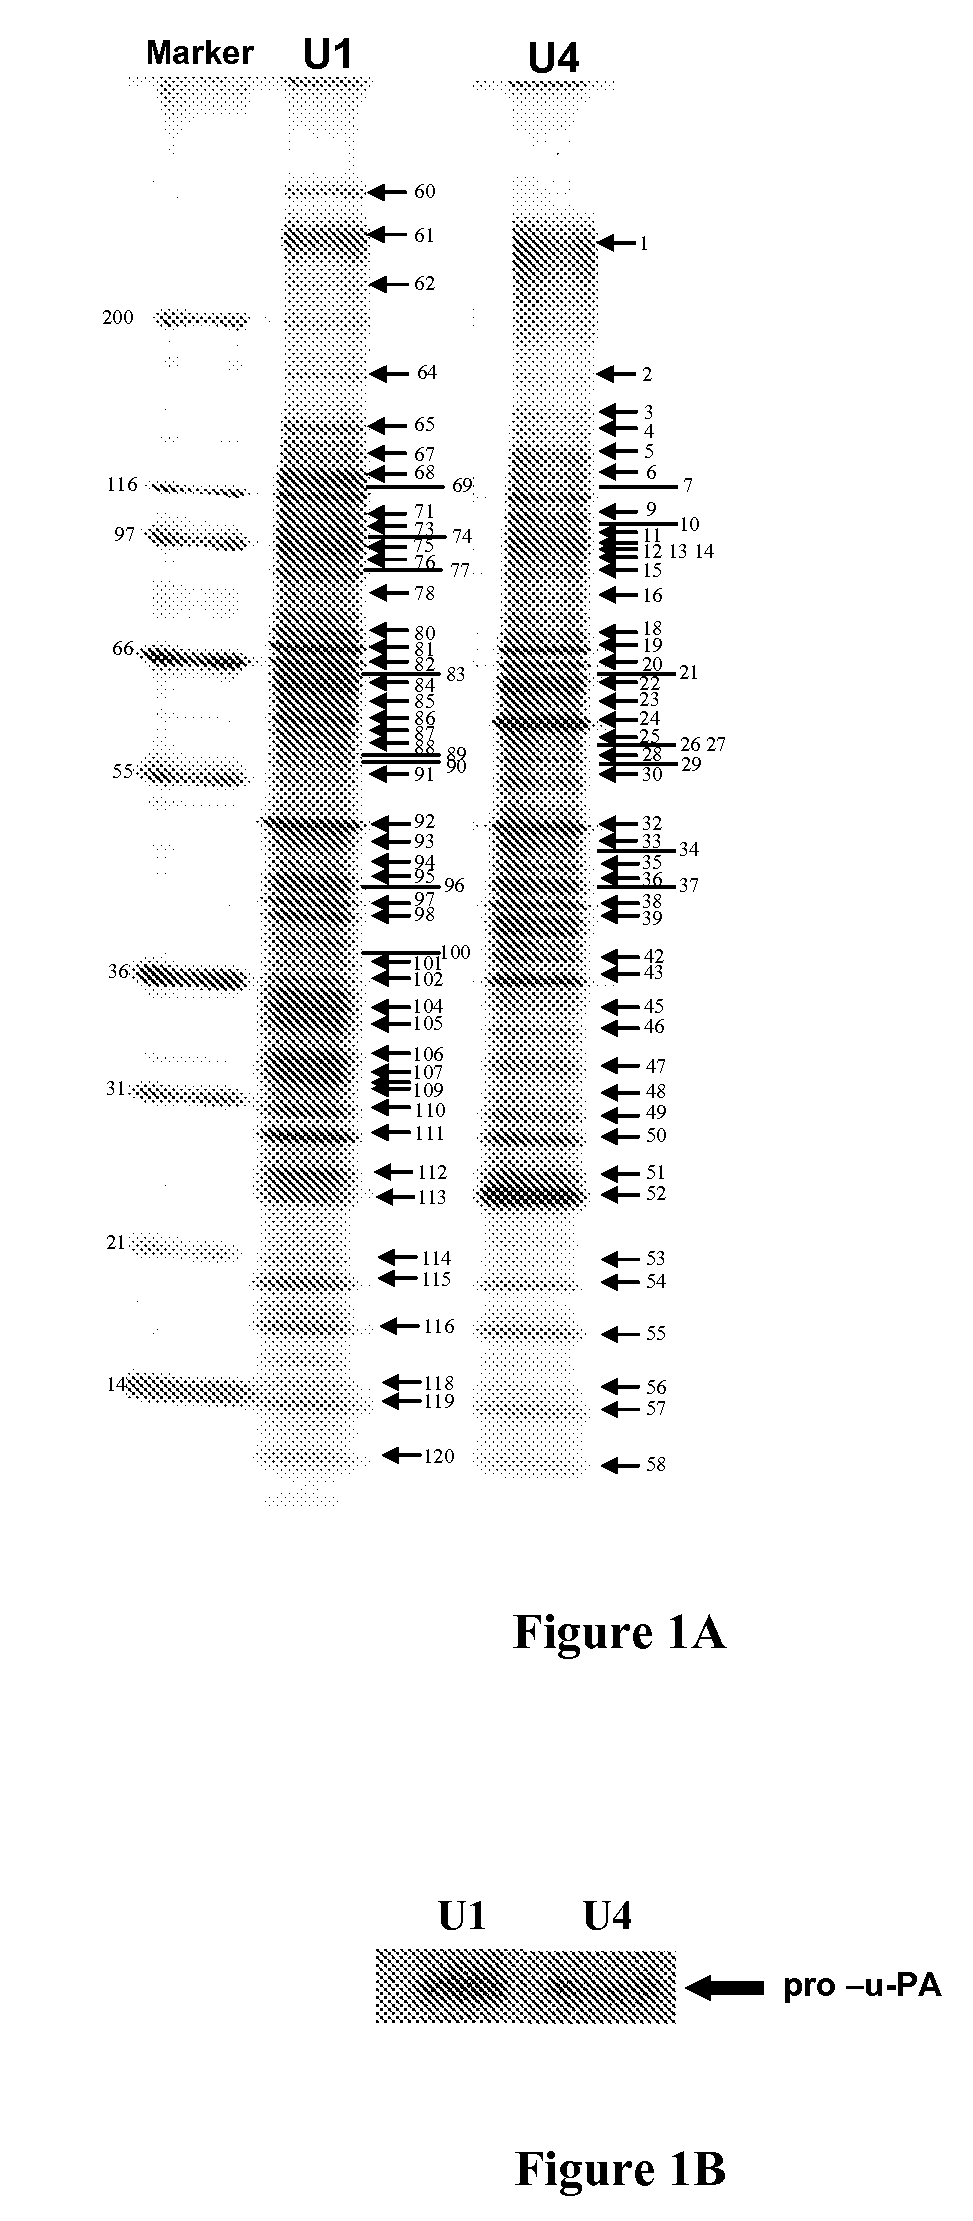 Method of identifying cancer biomarkers and cancer progression